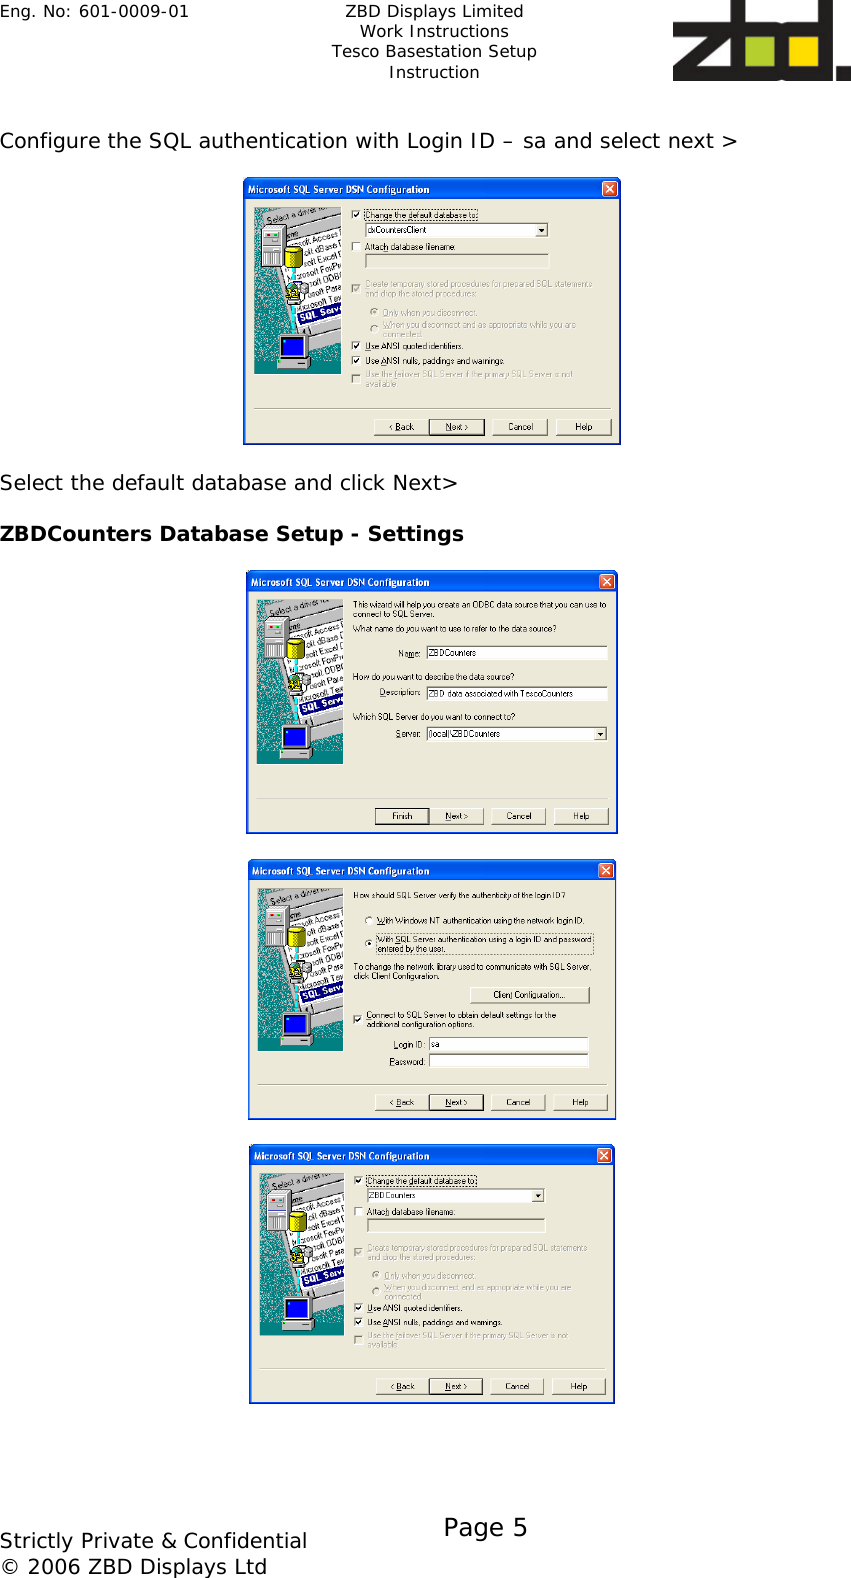 Eng. No: 601-0009-01   ZBD Displays Limited Work Instructions Tesco Basestation Setup Instruction    Strictly Private &amp; Confidential © 2006 ZBD Displays Ltd Page 5     Configure the SQL authentication with Login ID – sa and select next &gt;     Select the default database and click Next&gt;  ZBDCounters Database Setup - Settings           